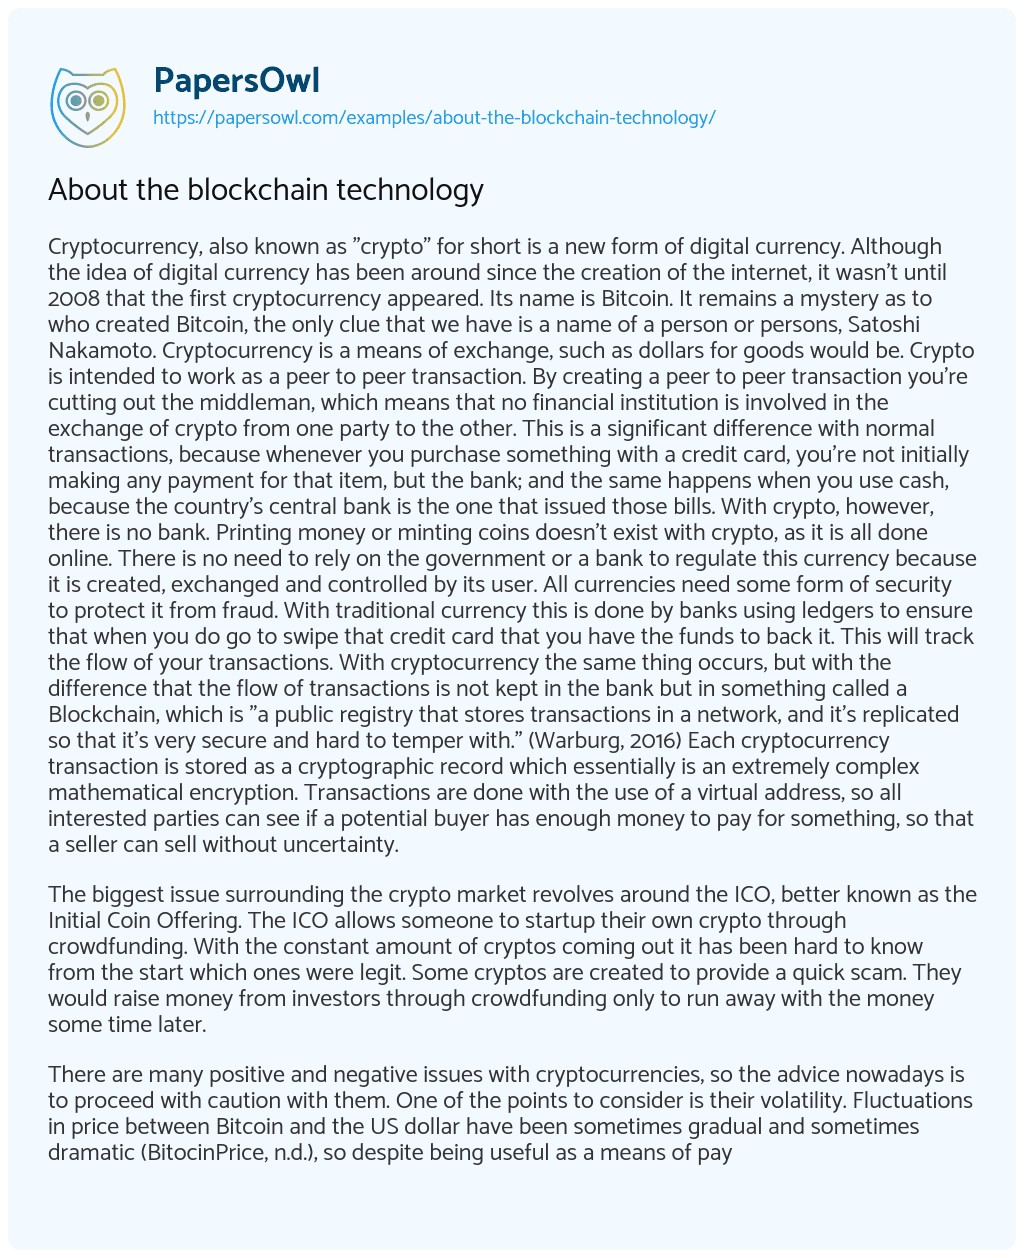 Essay on About the Blockchain Technology